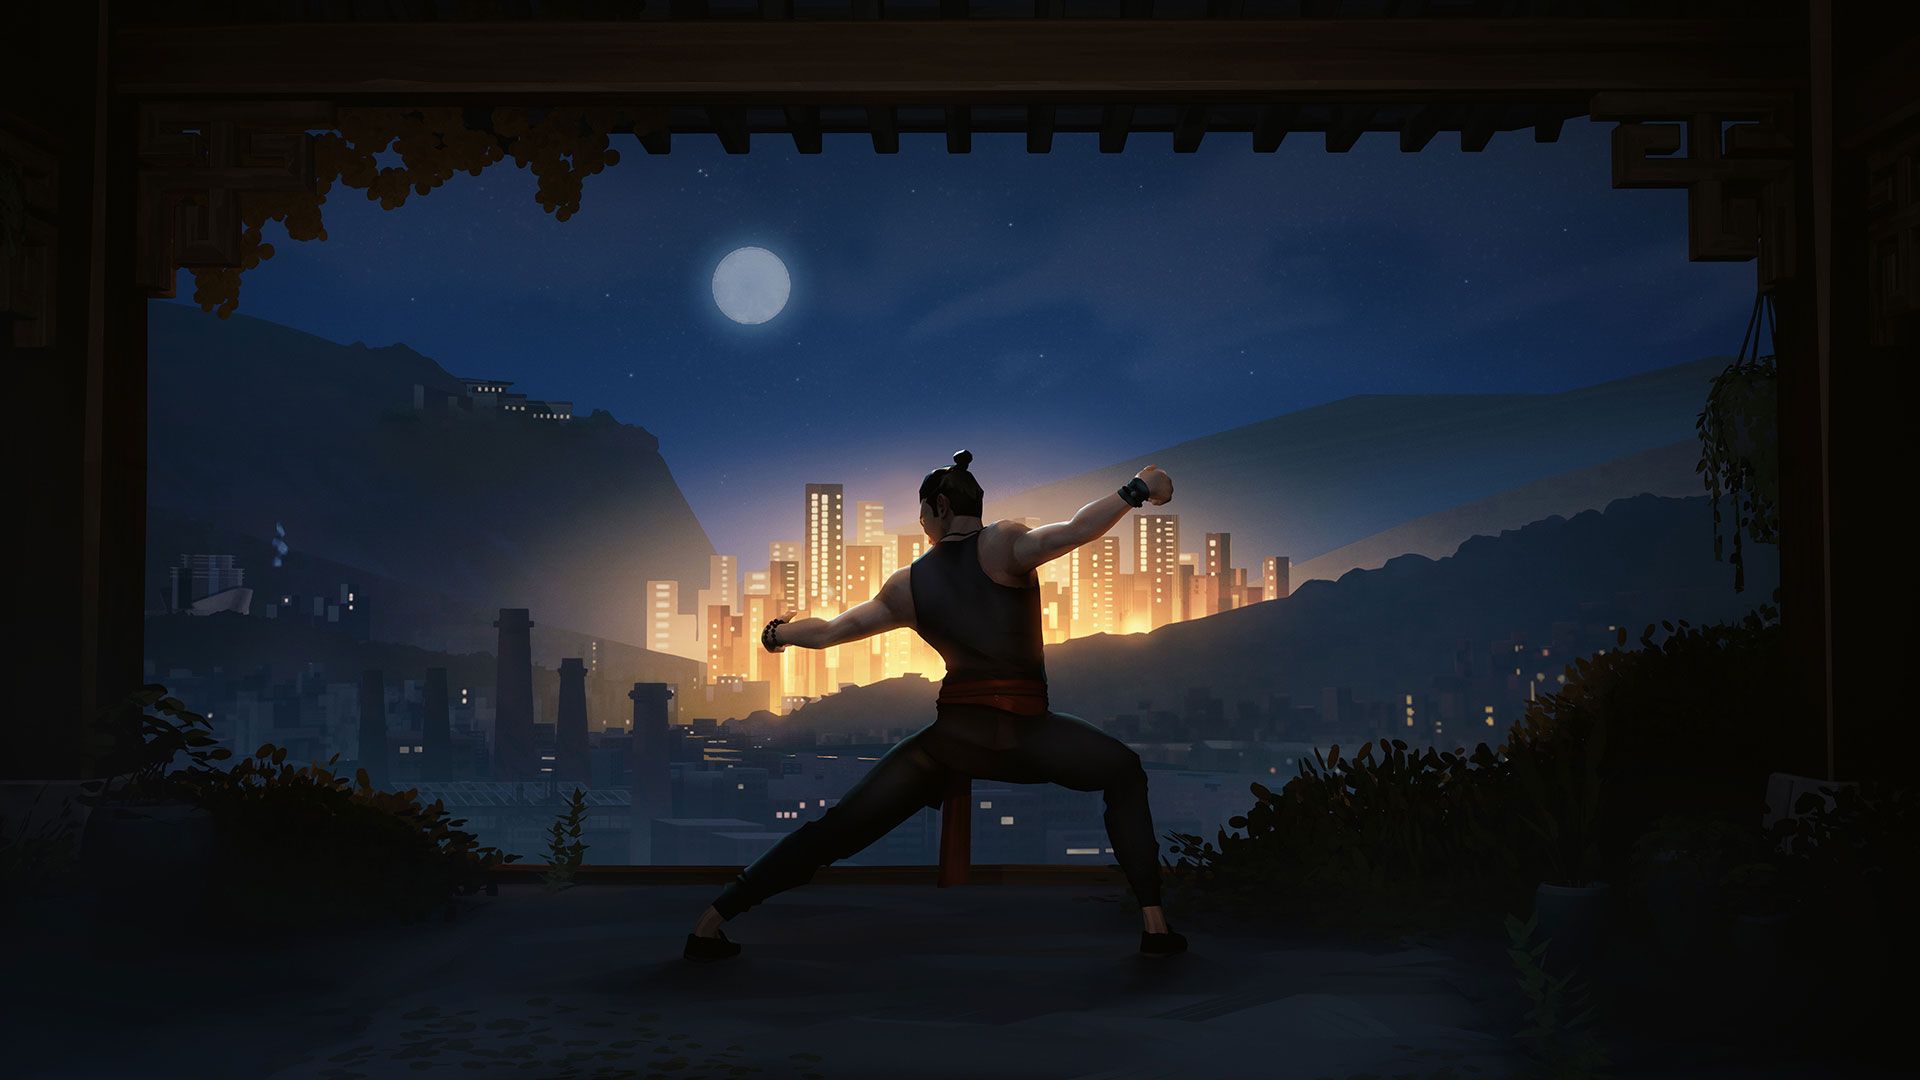 Sifu' Review: Game Doesn't Quite Live Up to Film Influences